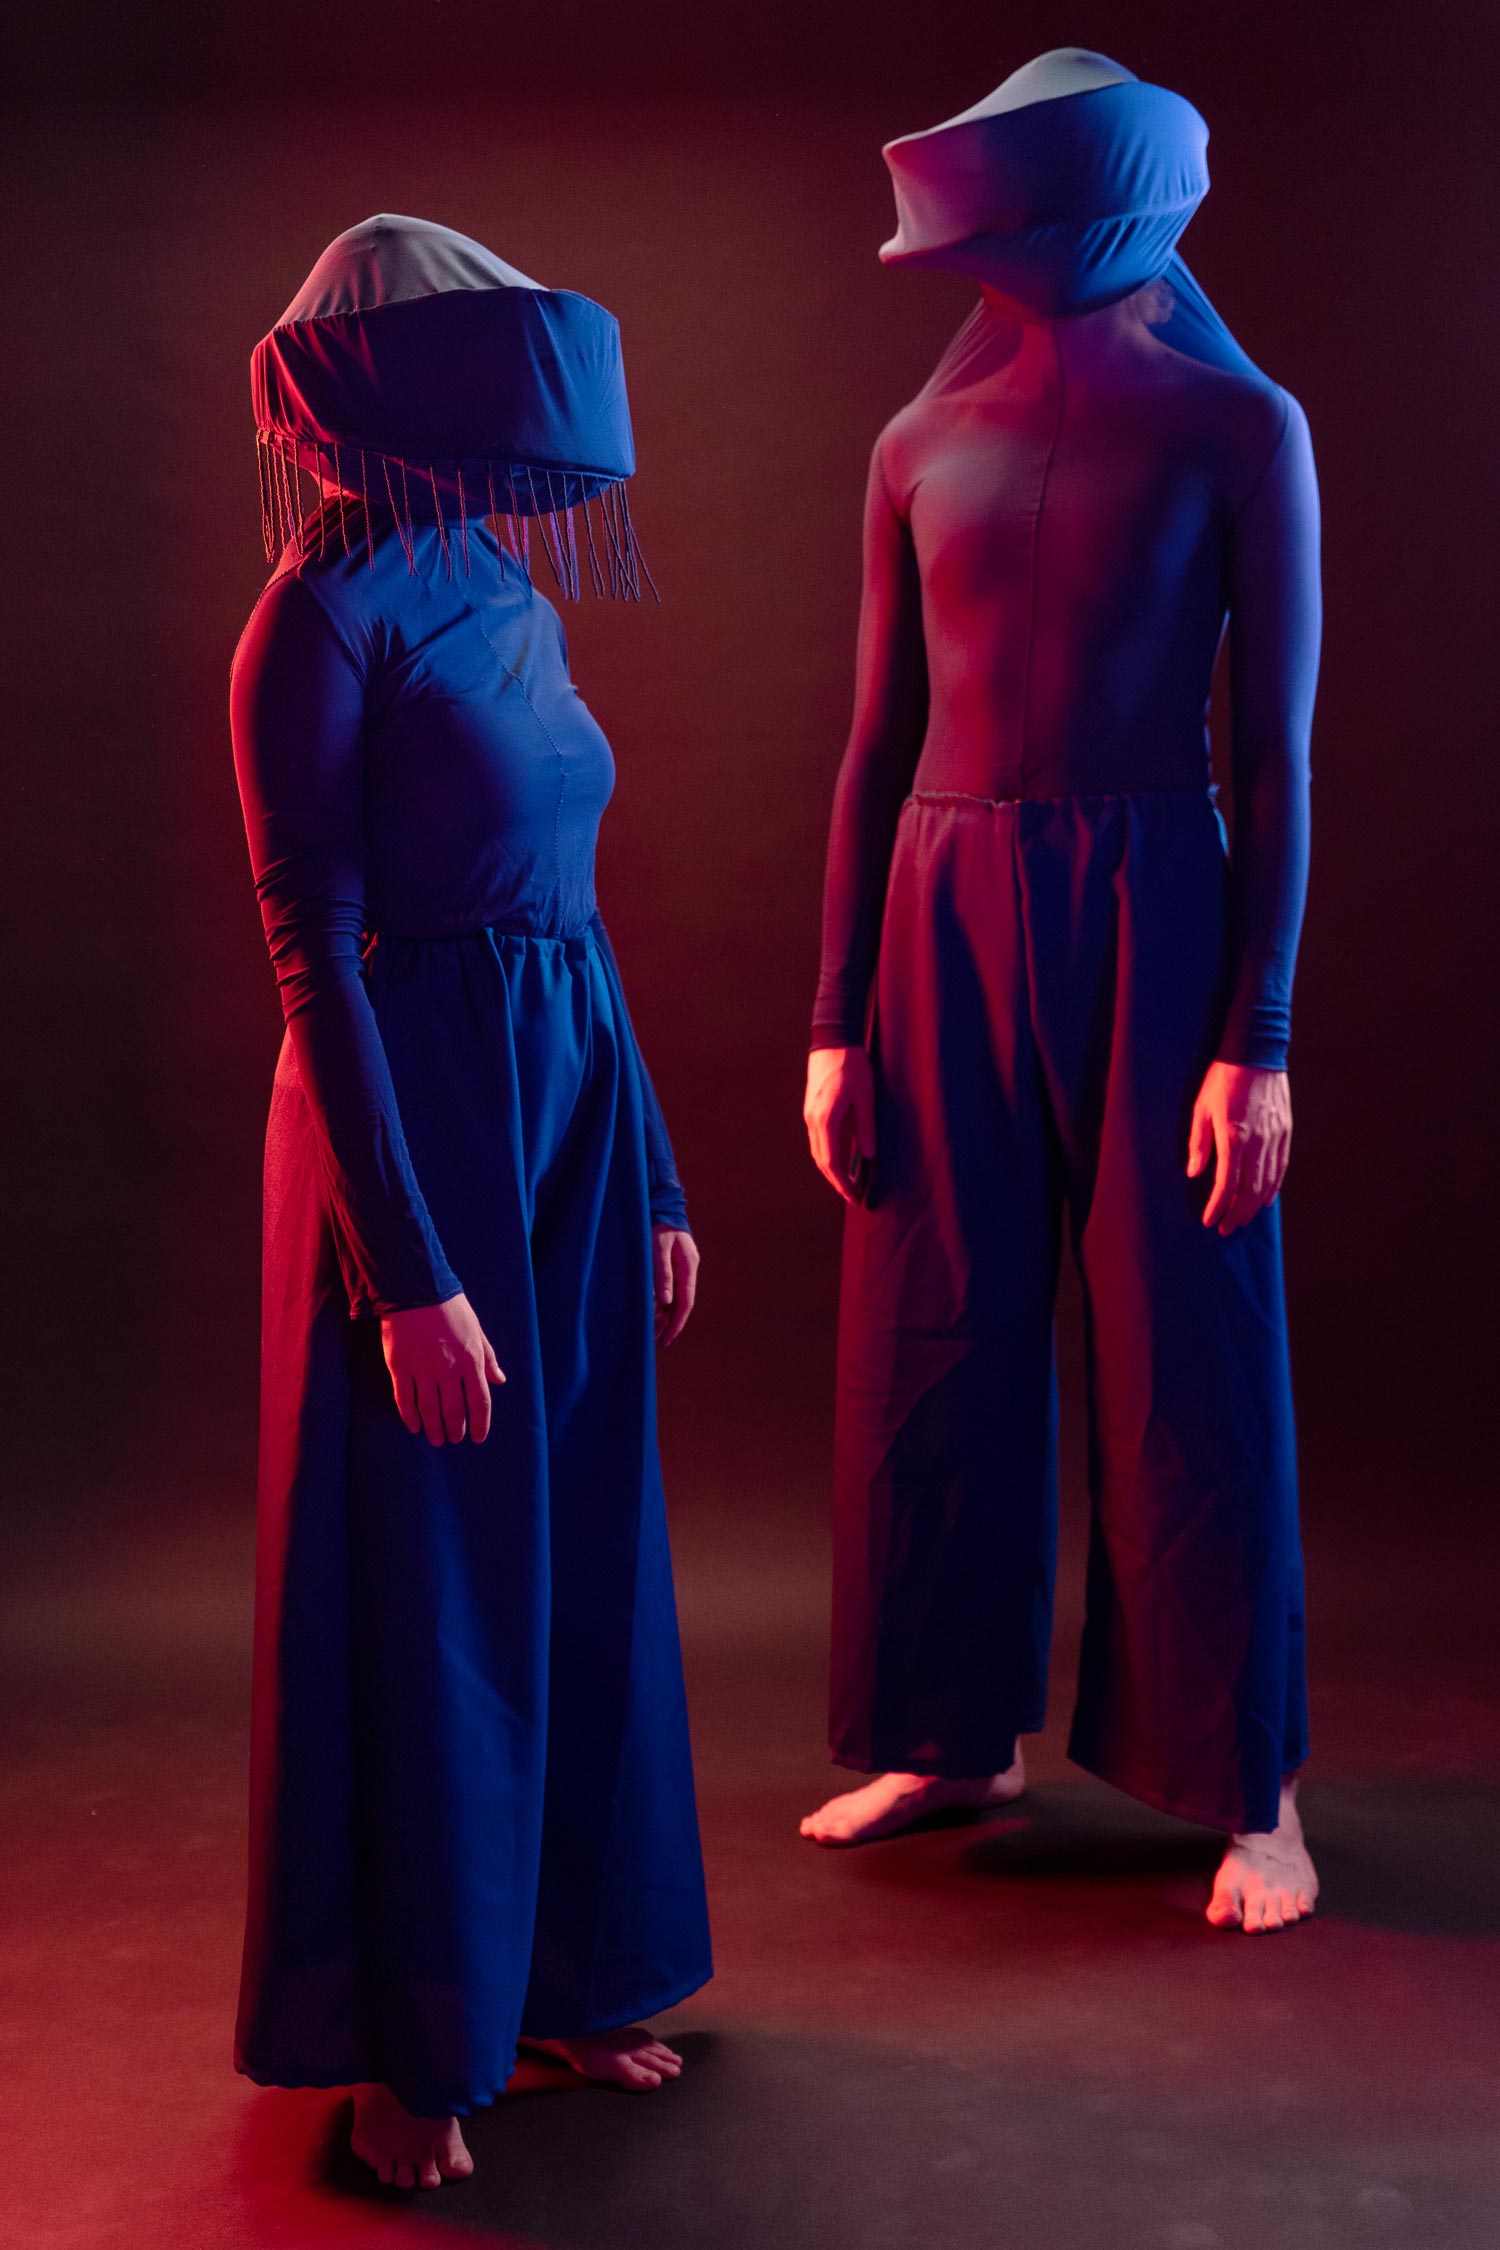 Two blue costumes in a ambient-lit photostuido